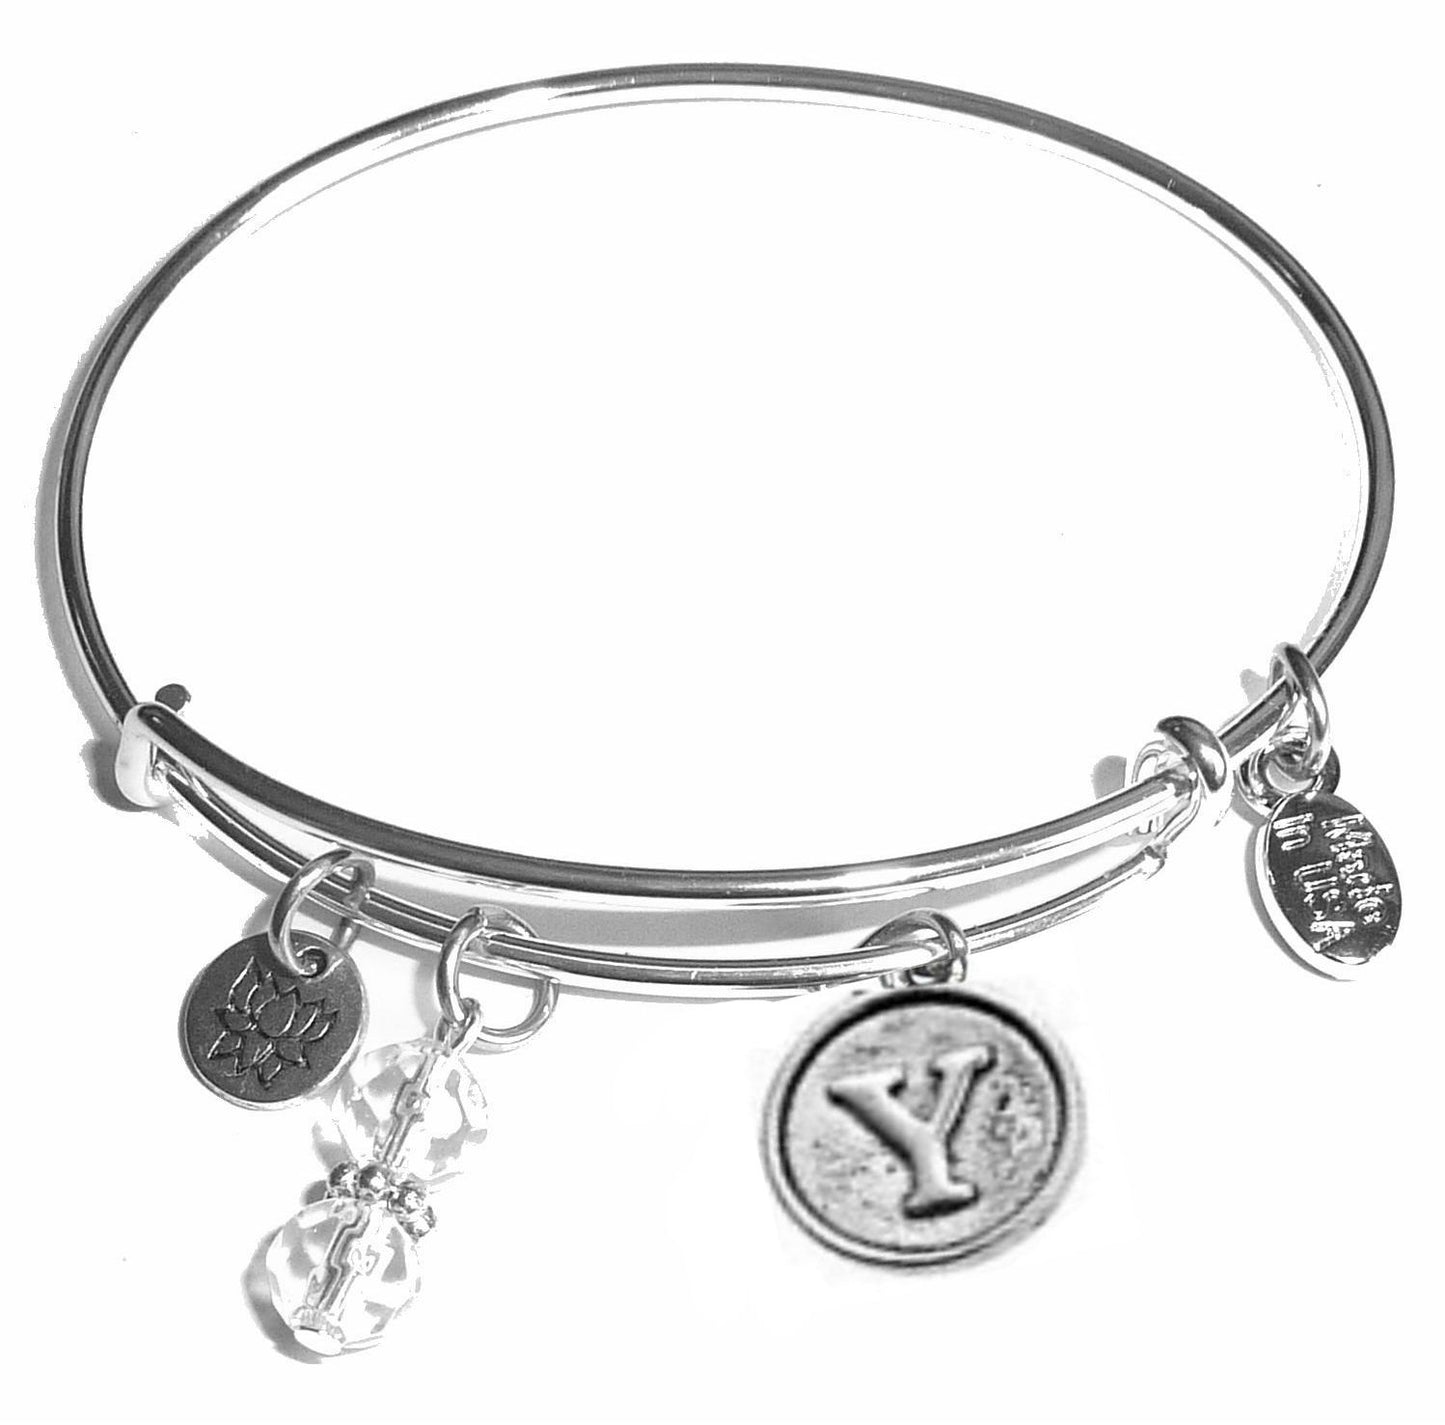 Y - Initial Bangle Bracelet -Expandable Wire Bracelet– Comes in a gift box